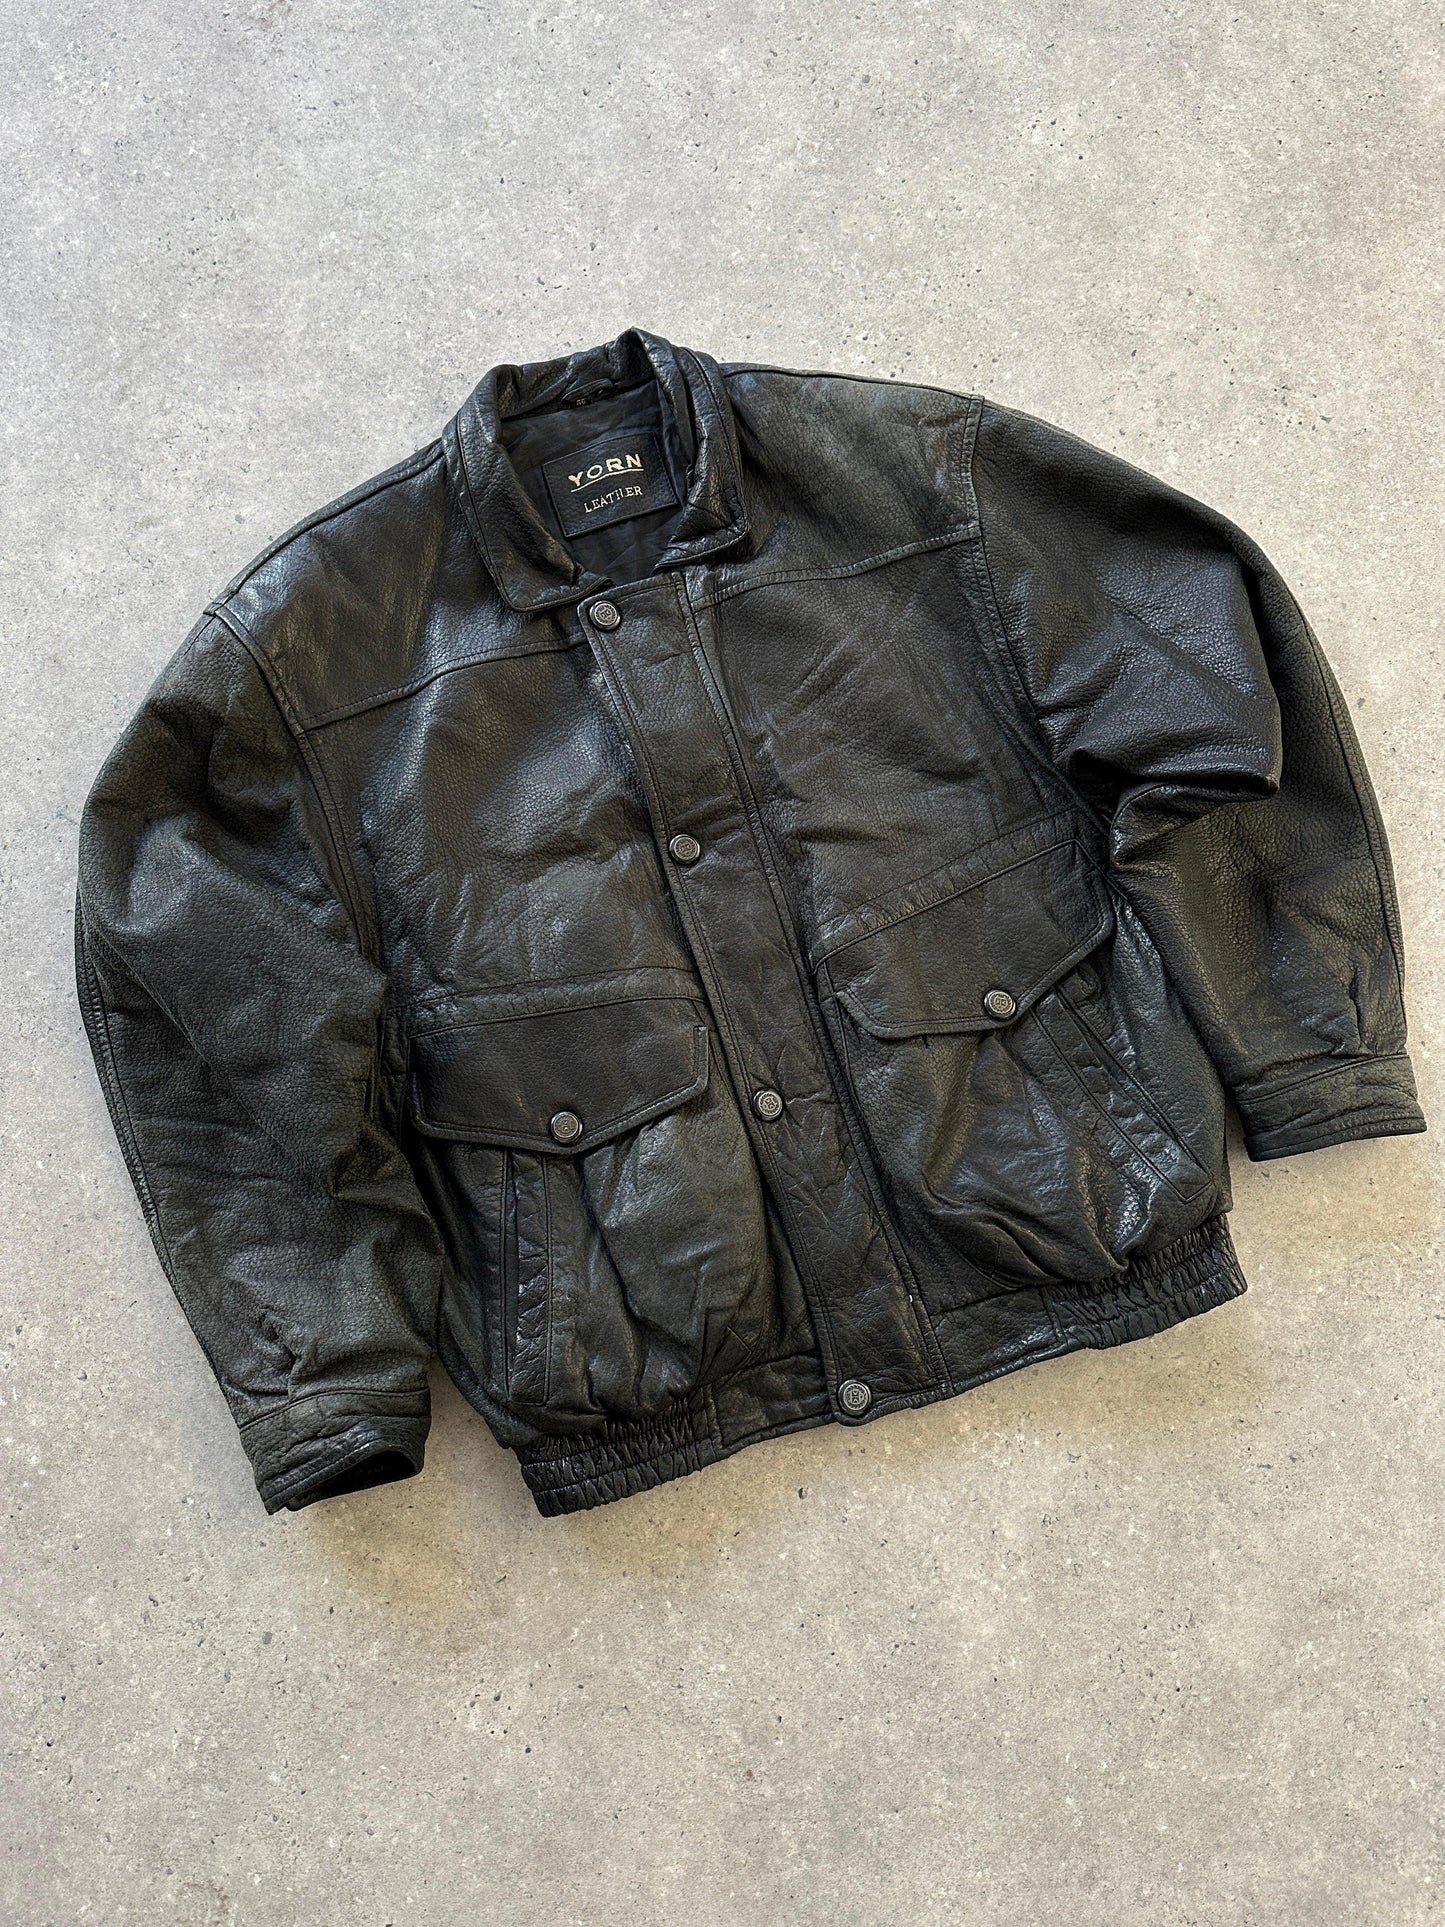 Vintage Textured Leather Bomber Jacket - M/L - Known Source